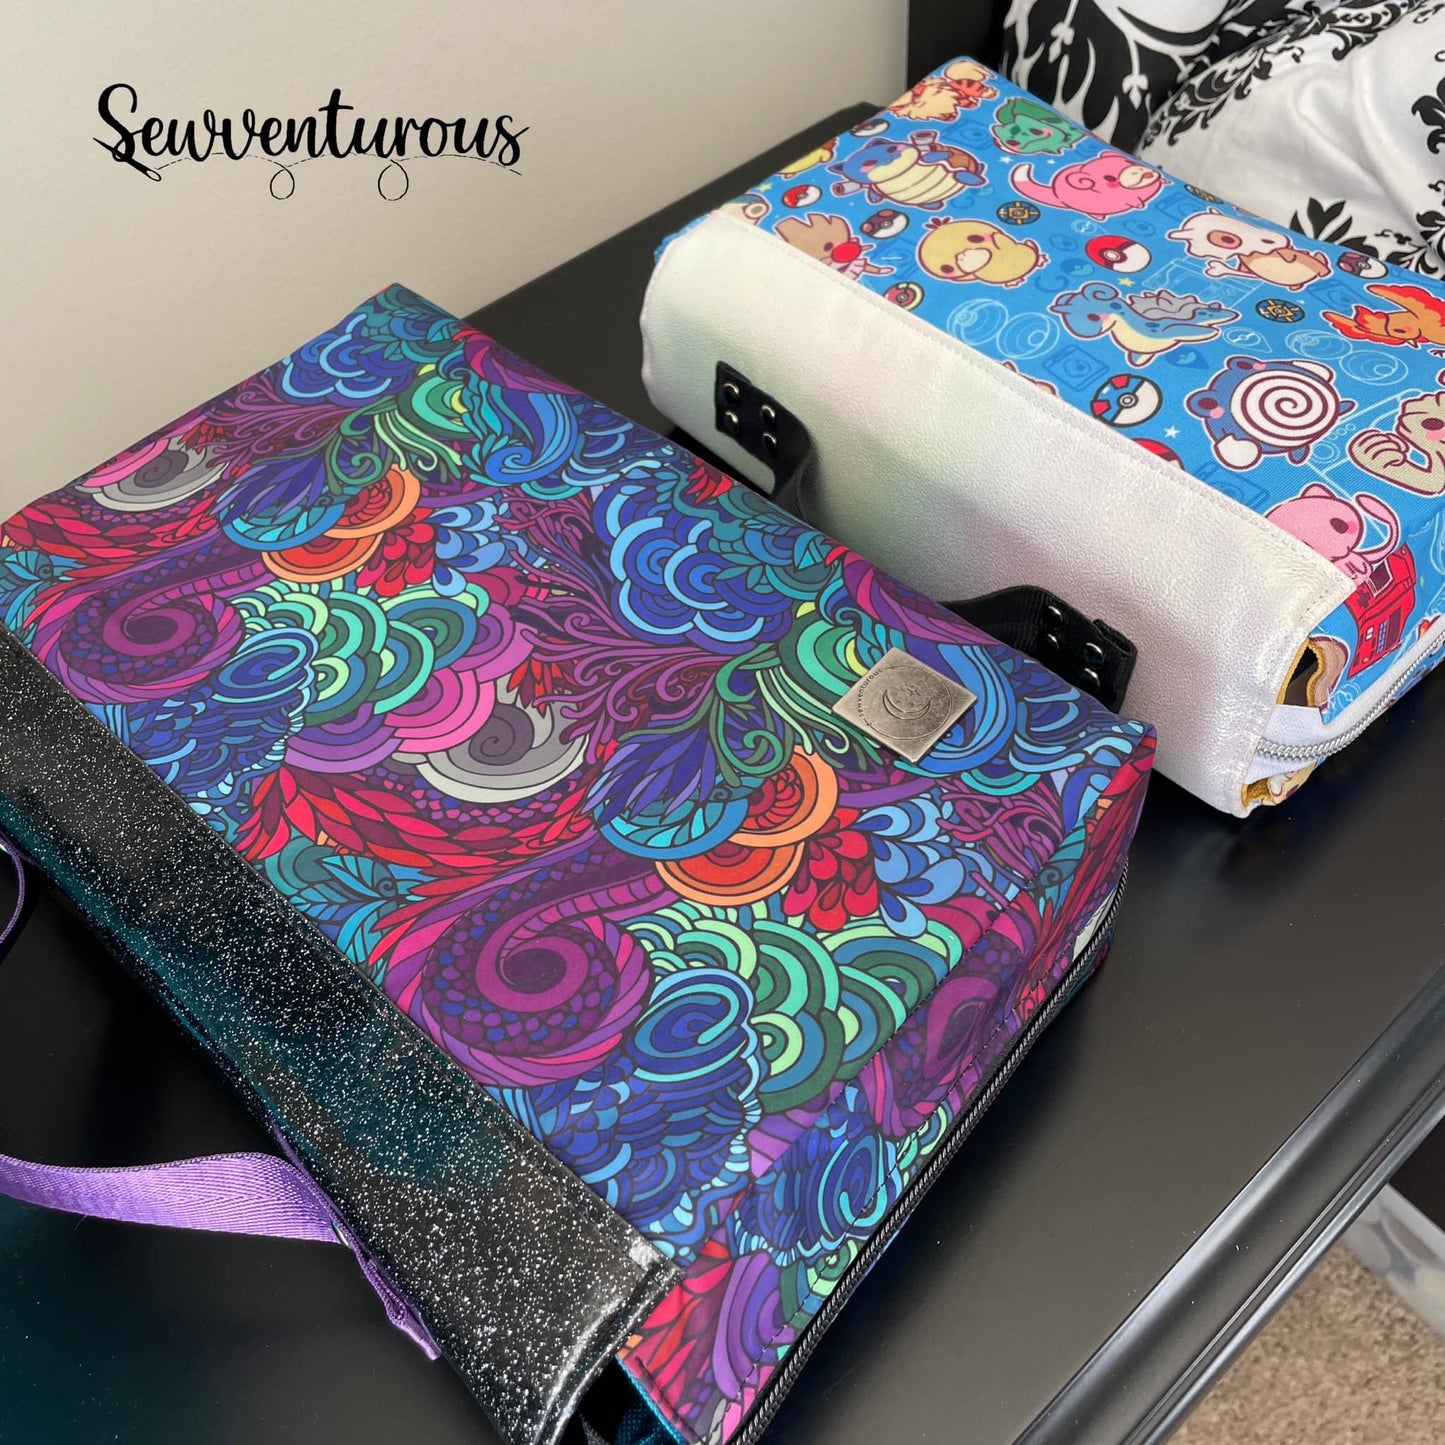 Honeycomb Cover PDF Sewing Pattern (Includes Projector files)